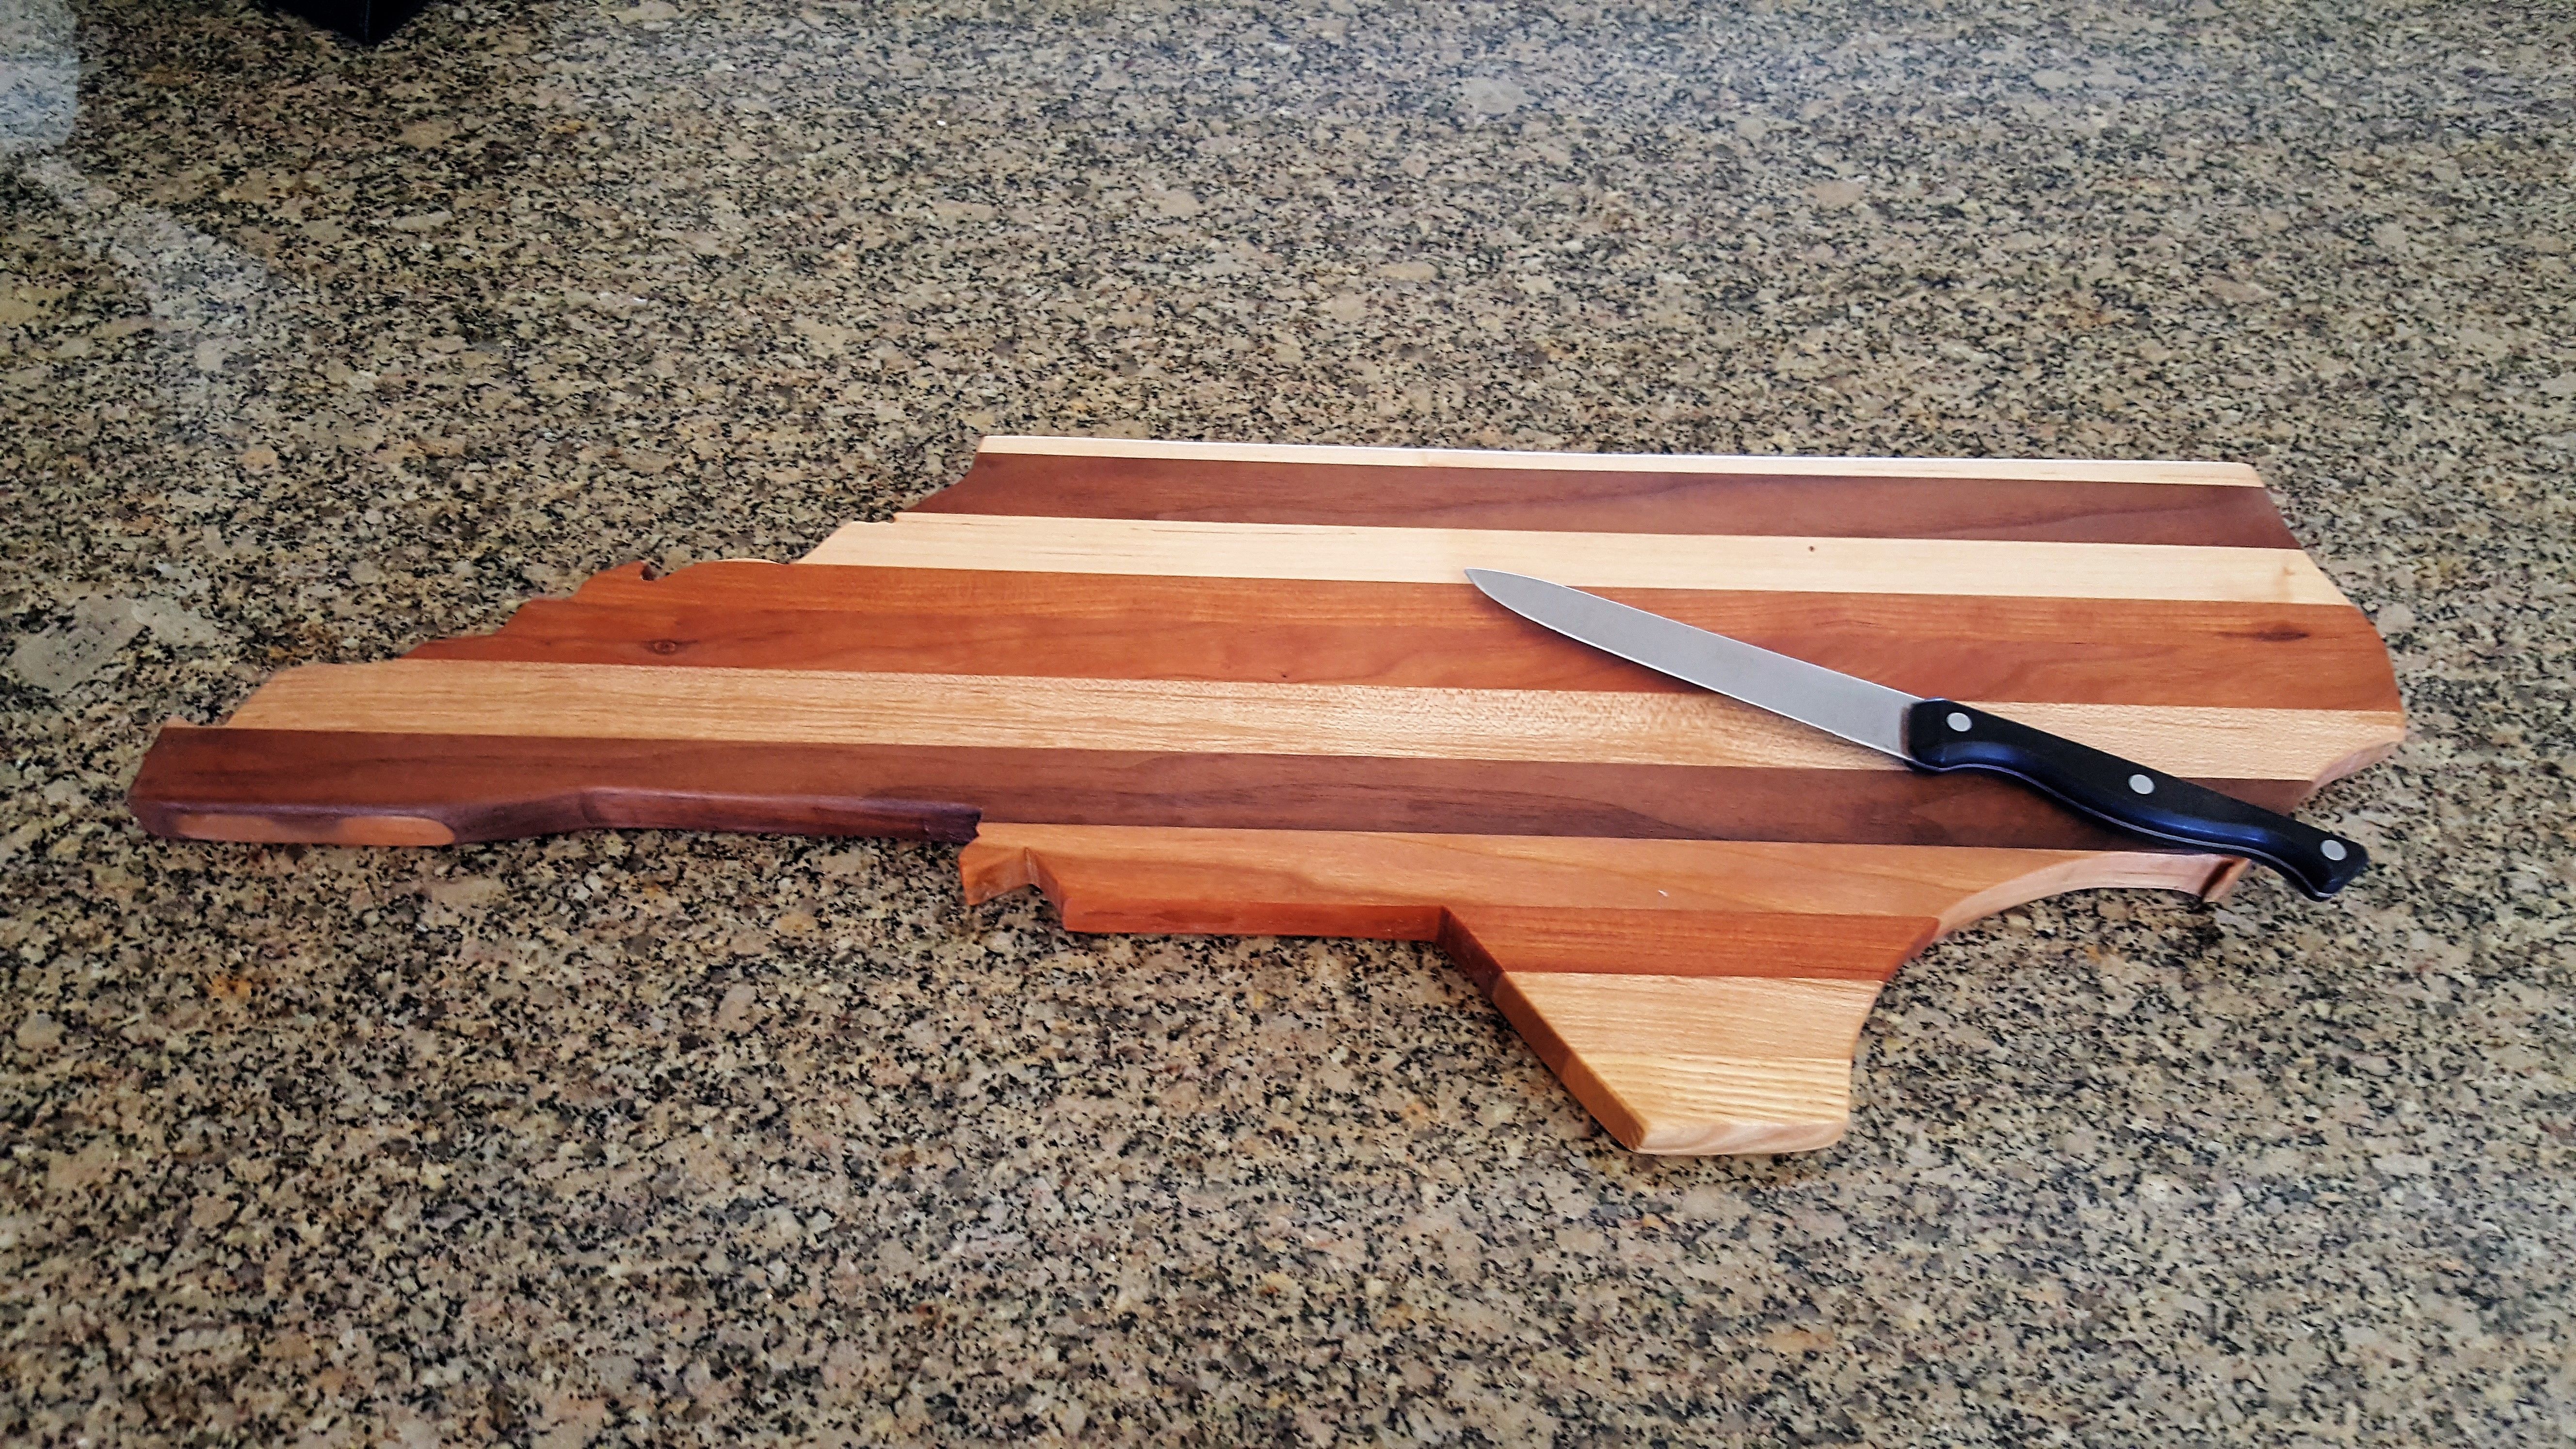 State Shaped Charcuterie Board